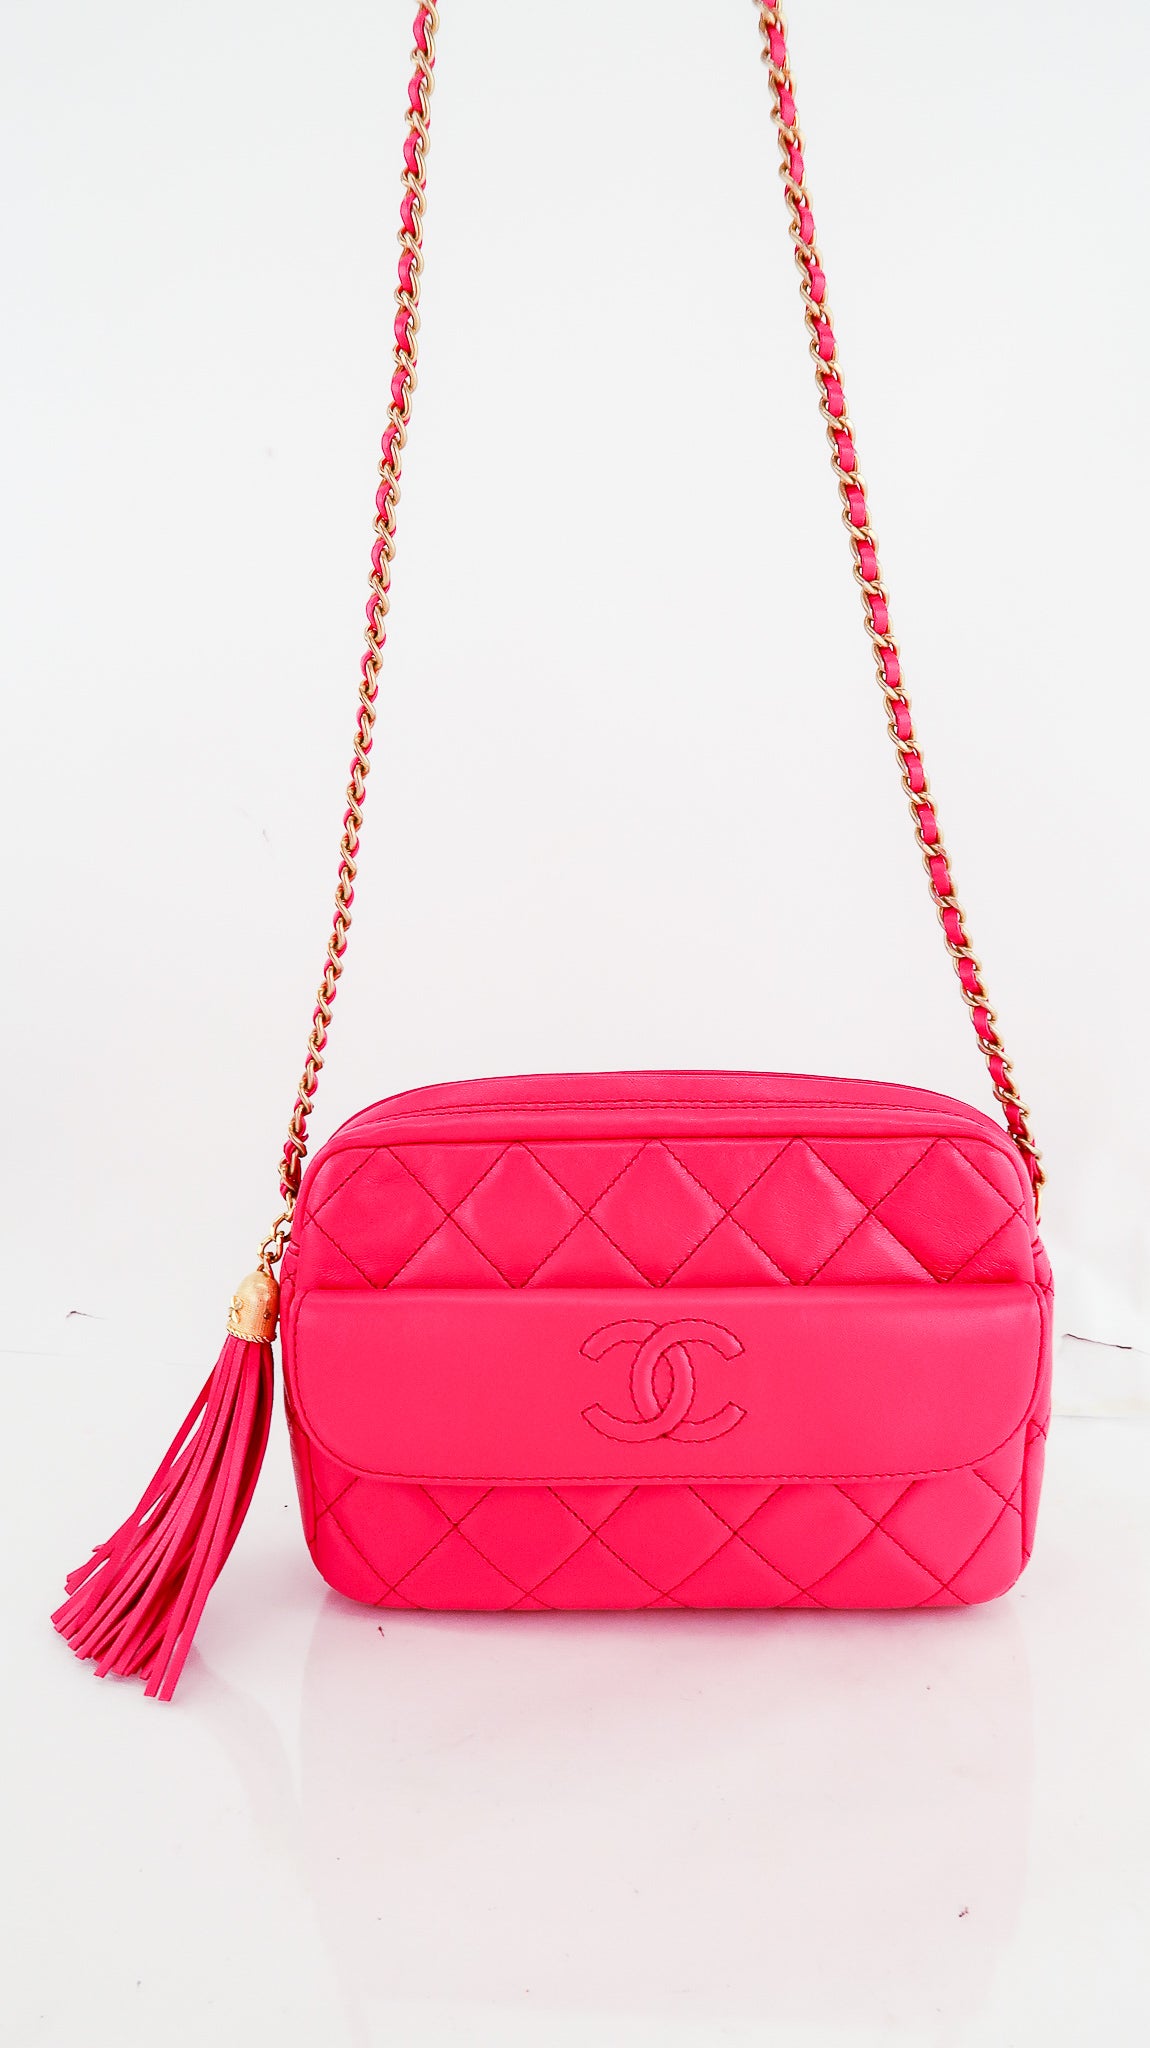 Chanel Pink Quilted Lambskin Leather Small Tassel Chain Camera Bag